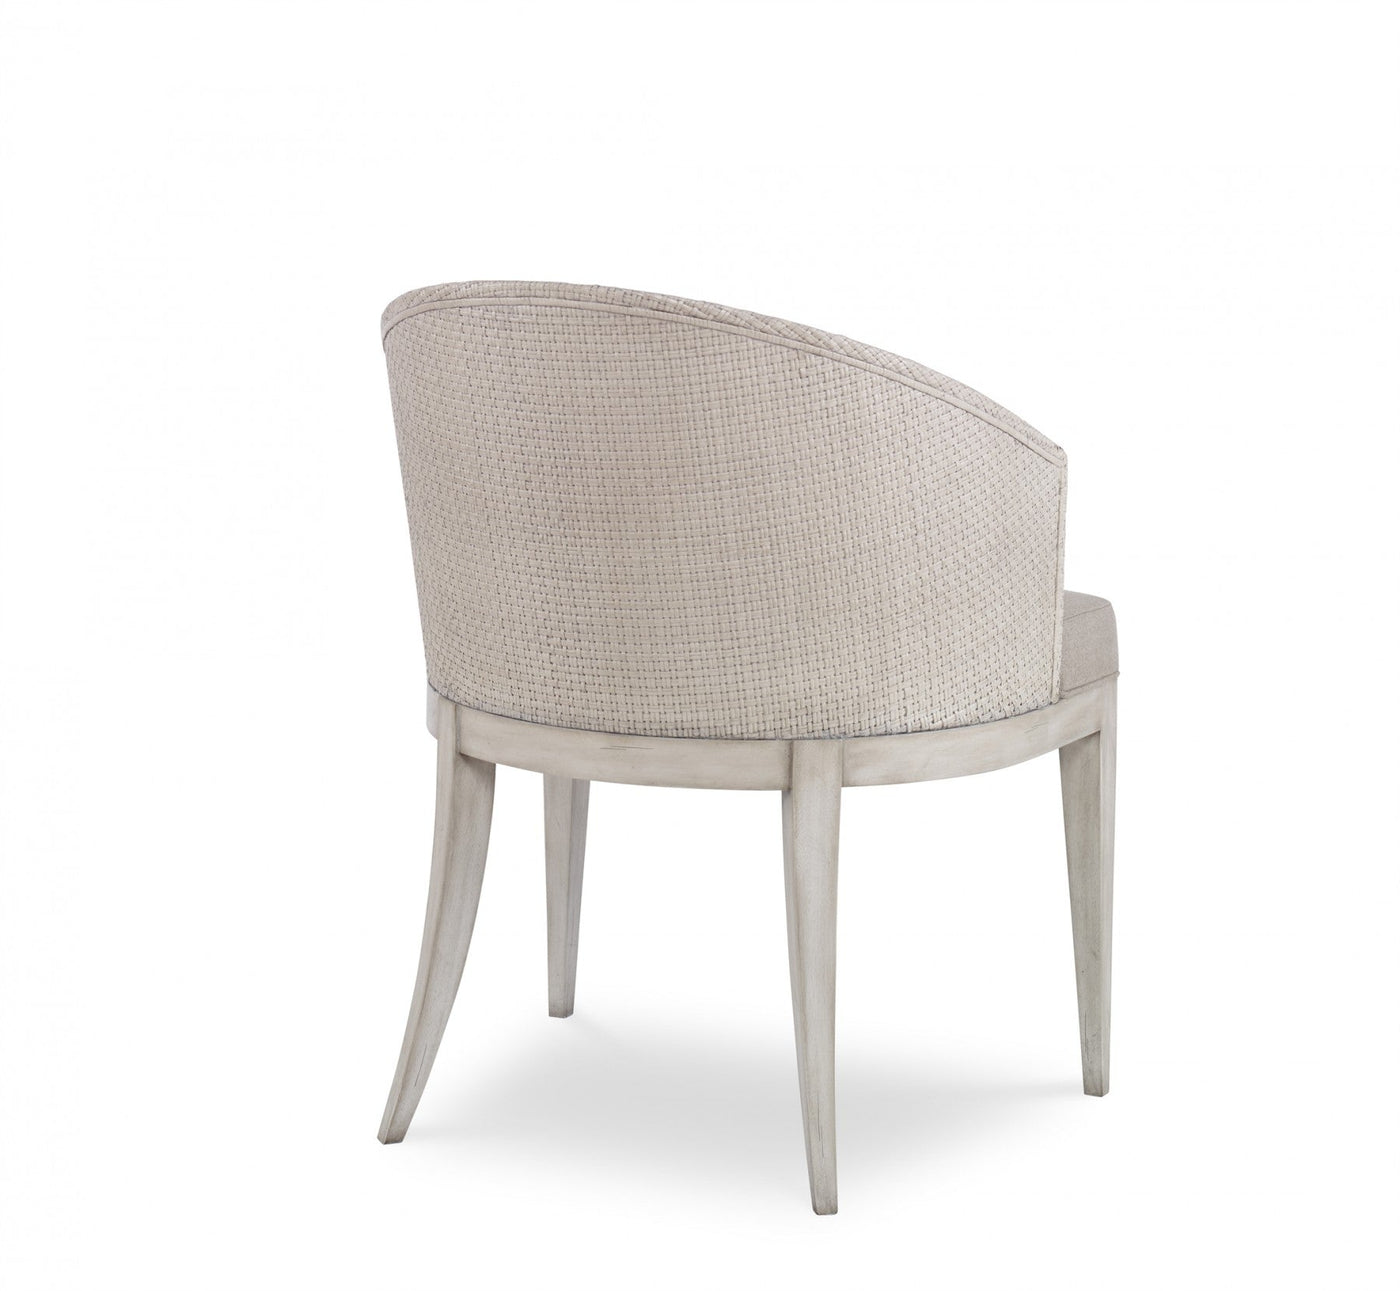 DINING ARMCHAIR FLAX WOVEN PEEL CANING